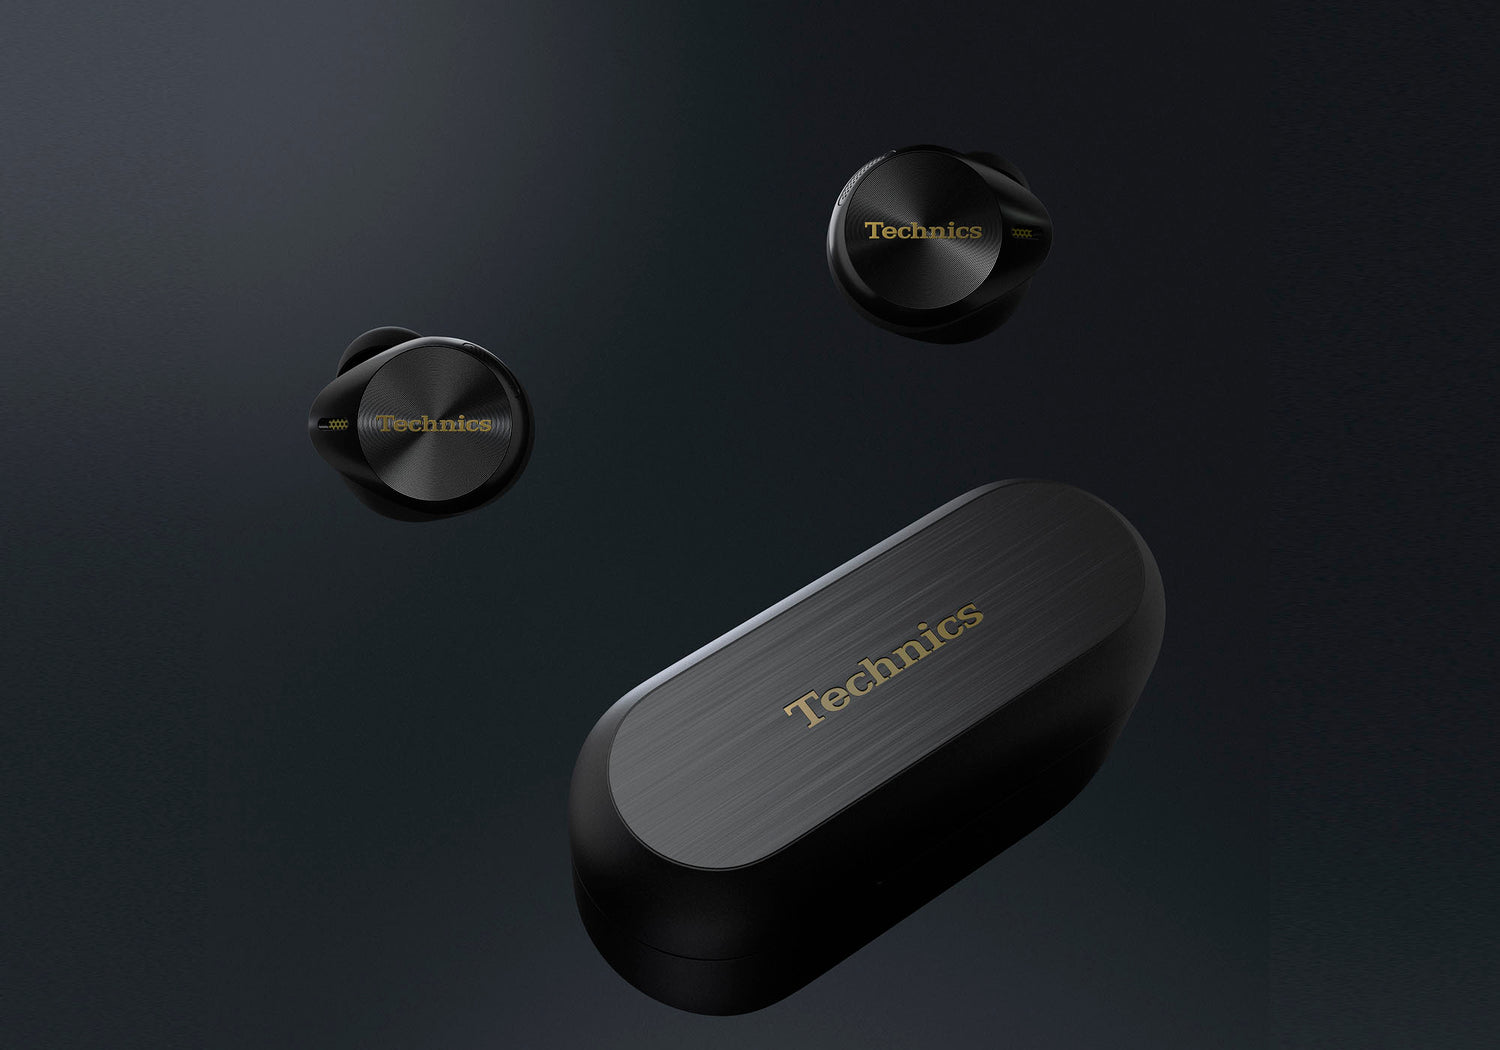 Never miss a beat with Technics’ brand new and improved True Wireless earbuds